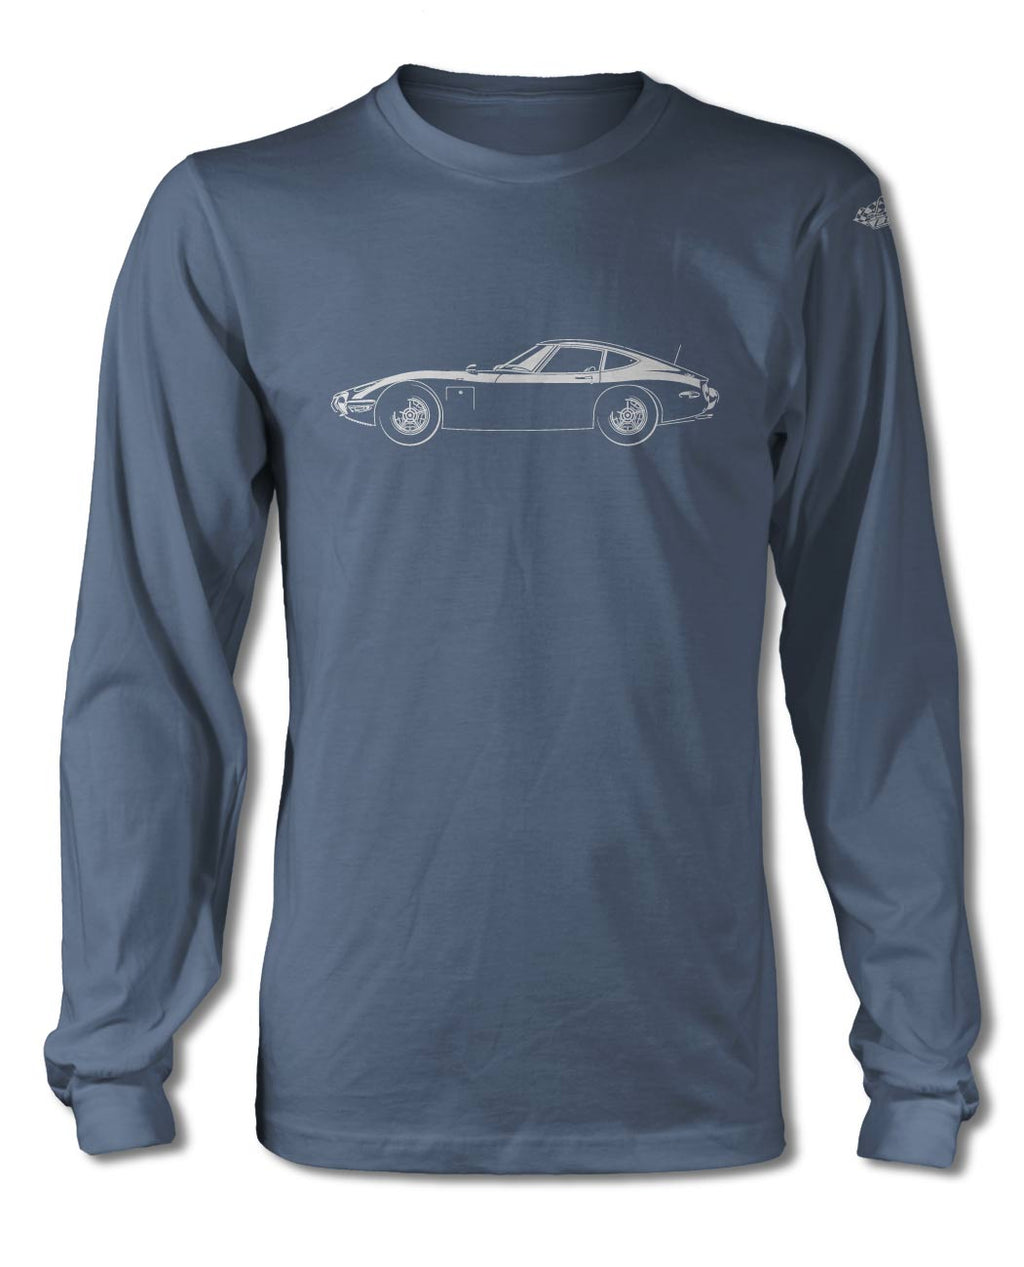 Toyota 2000GT Coupe T-Shirt - Long Sleeves - Side View